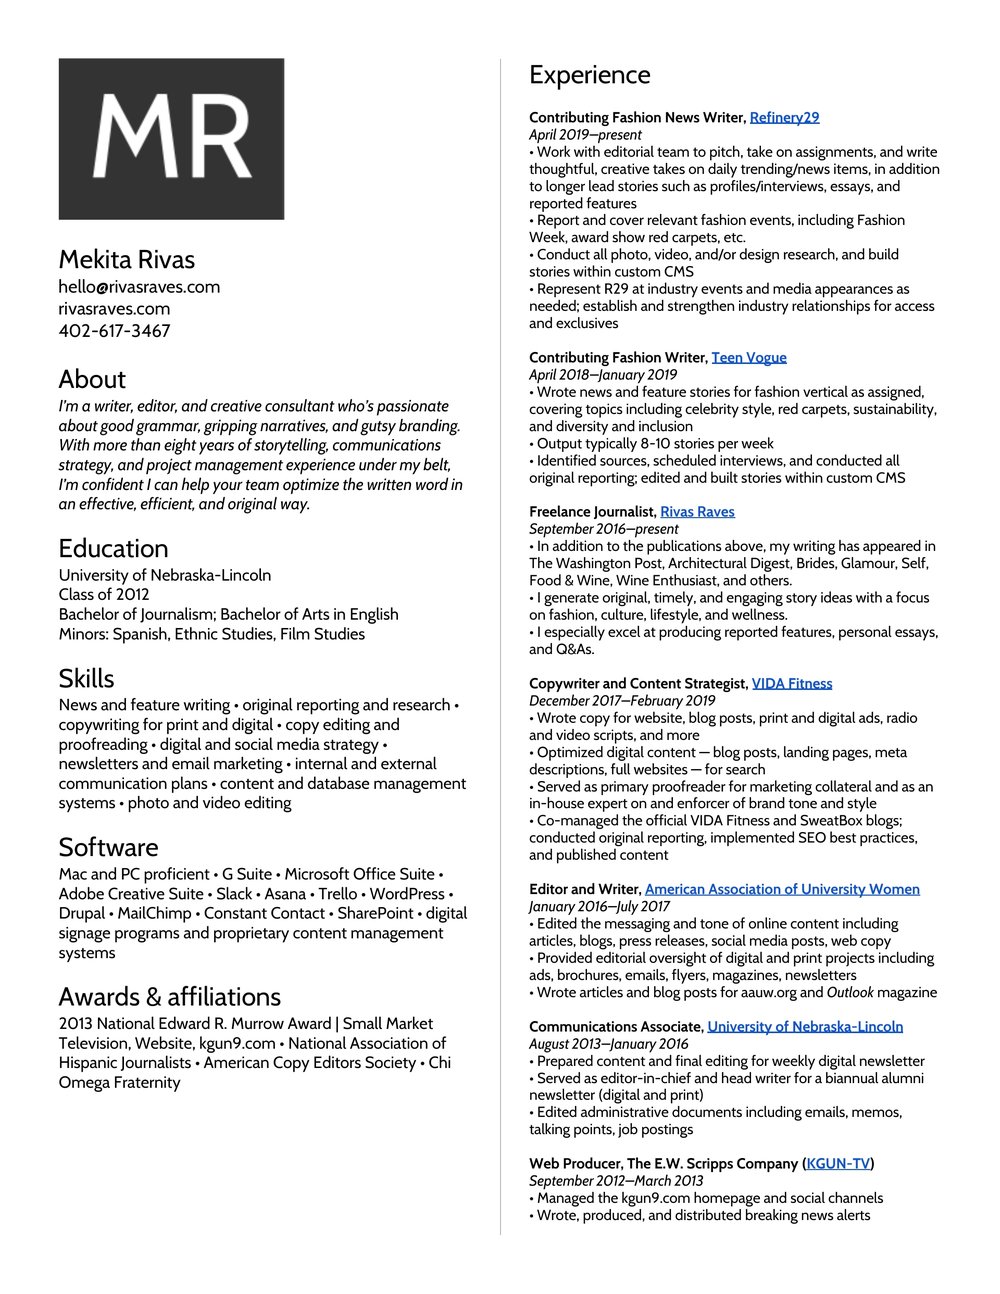 image of a resume cover letter 2019 image resize upload image of a good resume 2020 image sample of a resume image of a simple resume image of a professional resume image of a basic resume image of a job resume example